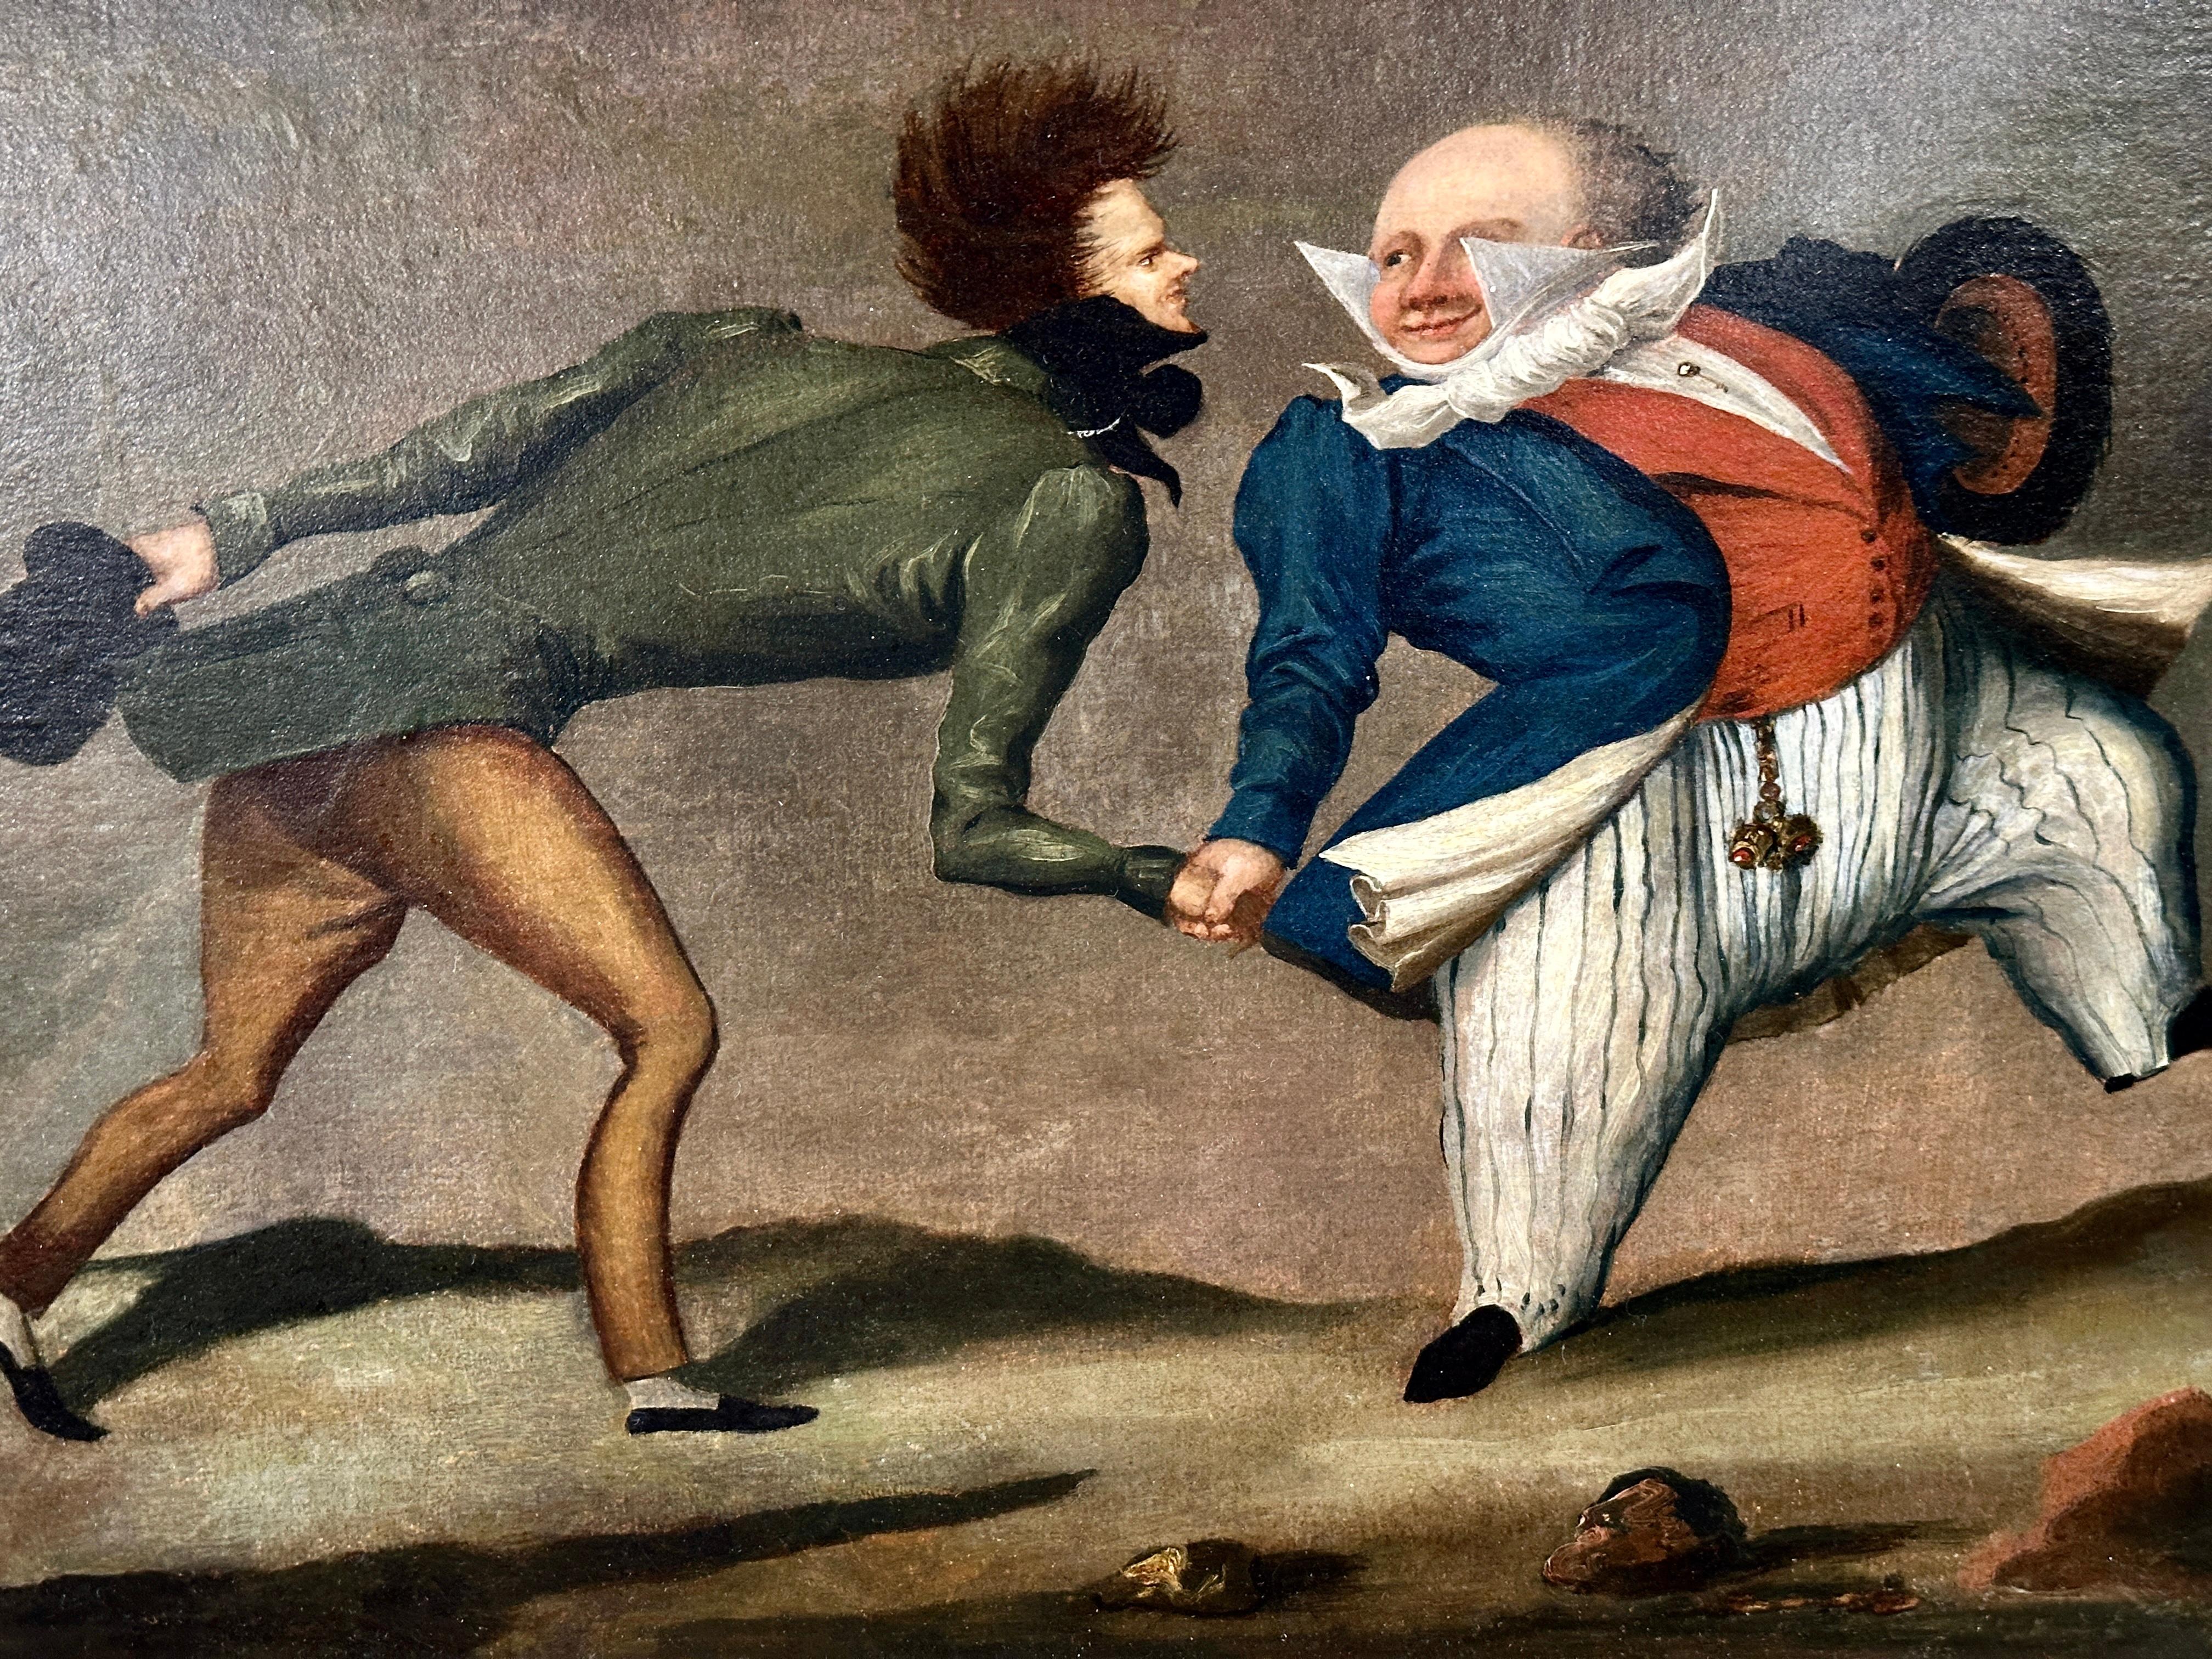 A whimsical painting of a pickpocket attempting to pick a gentleman's pocket. Likely European, definitely 19th century the painting appears to have been relined and touched up in the past. The frame appears newer, perhaps added when the painting was